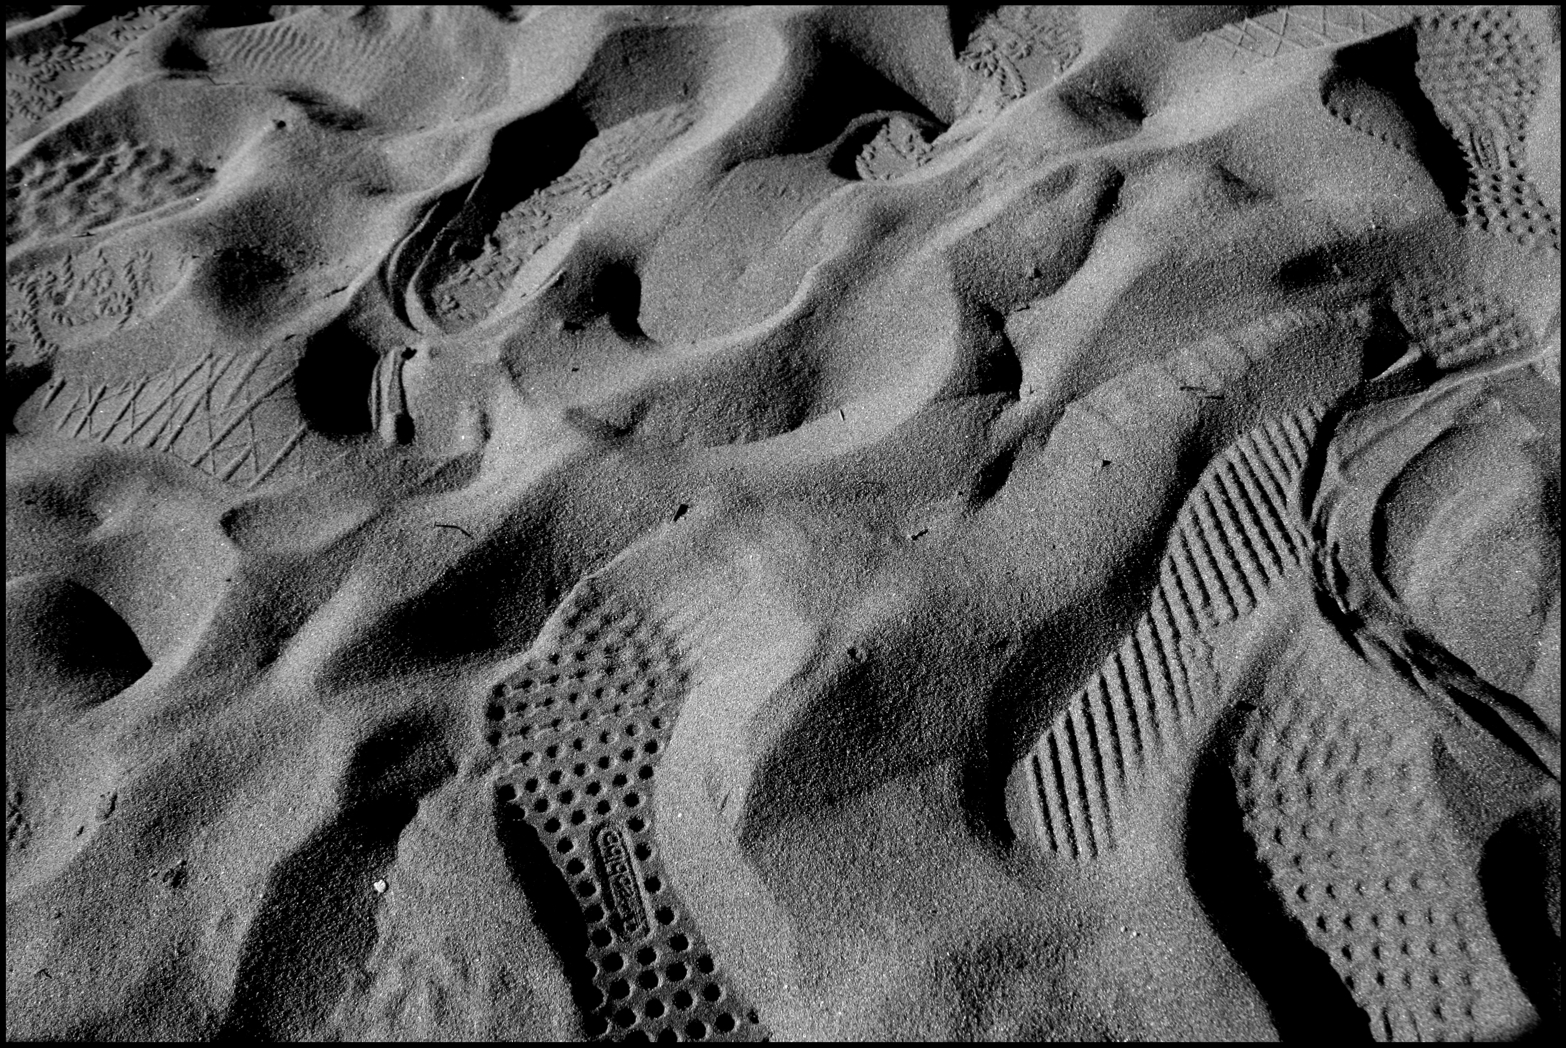 The Footprints on the Sand